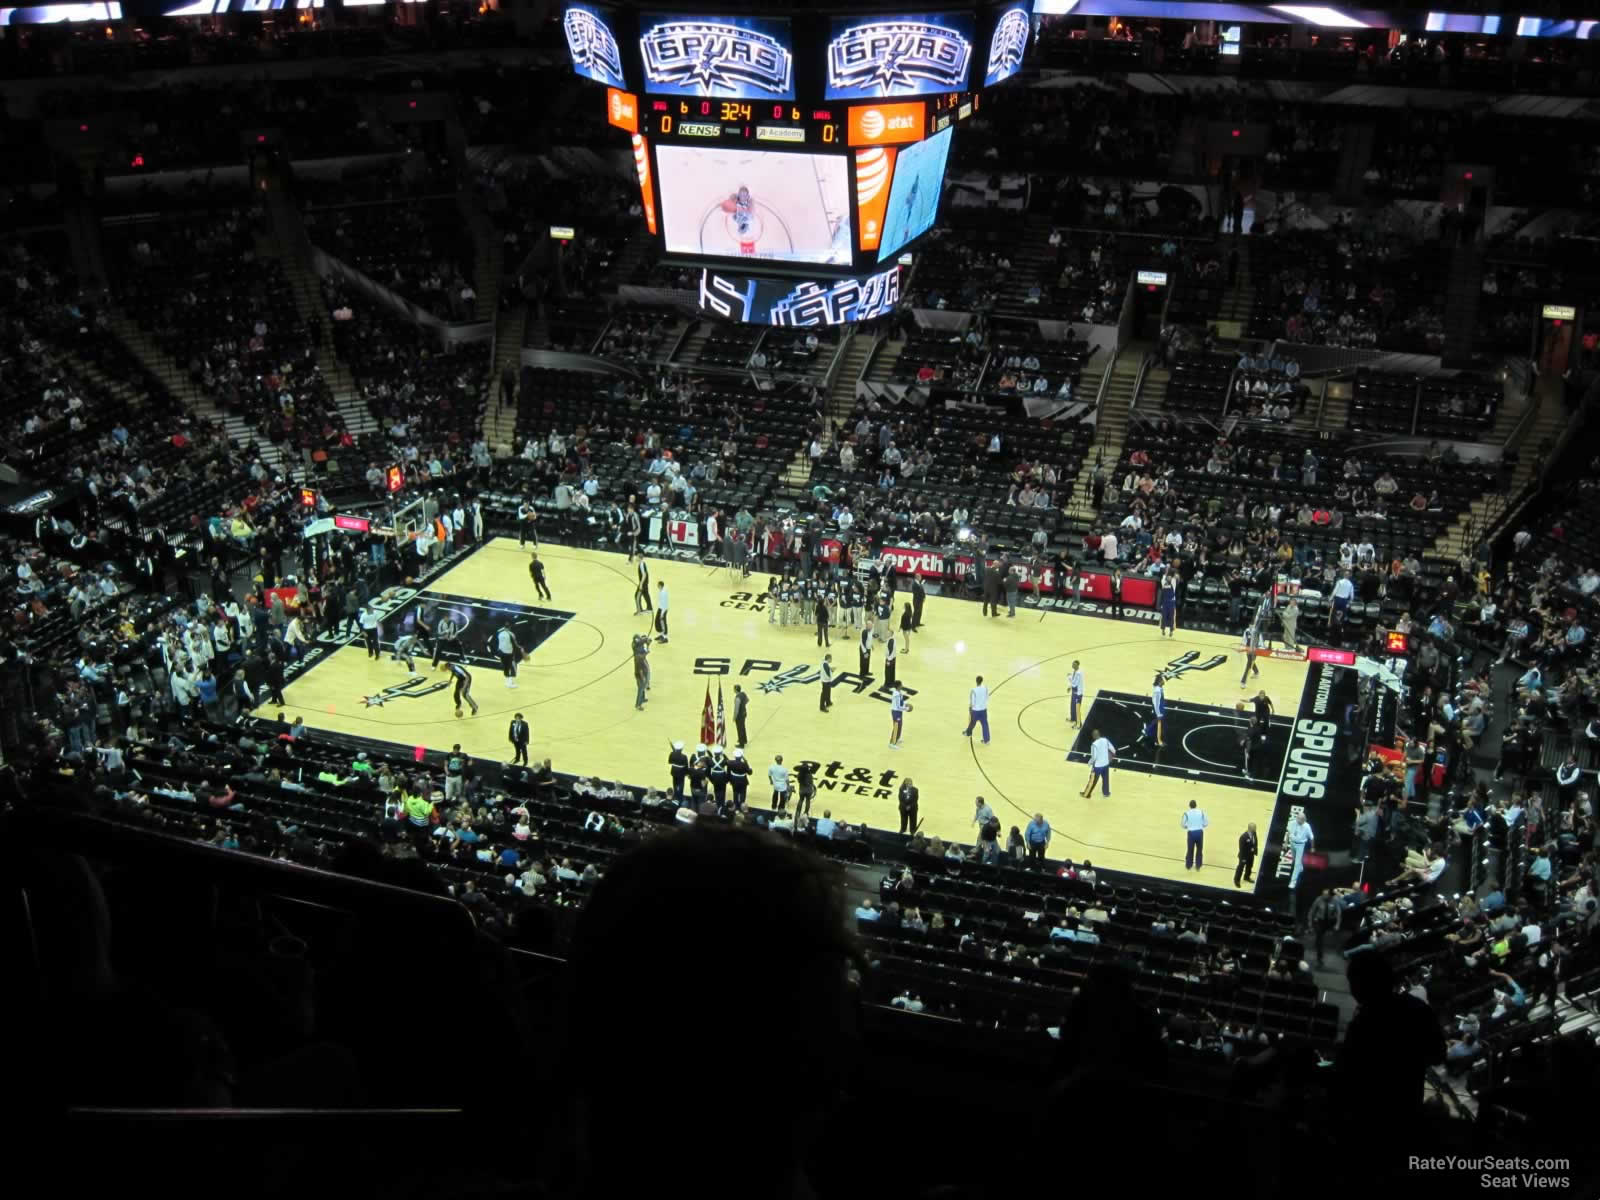 section 222, row 12 seat view  for basketball - at&t center